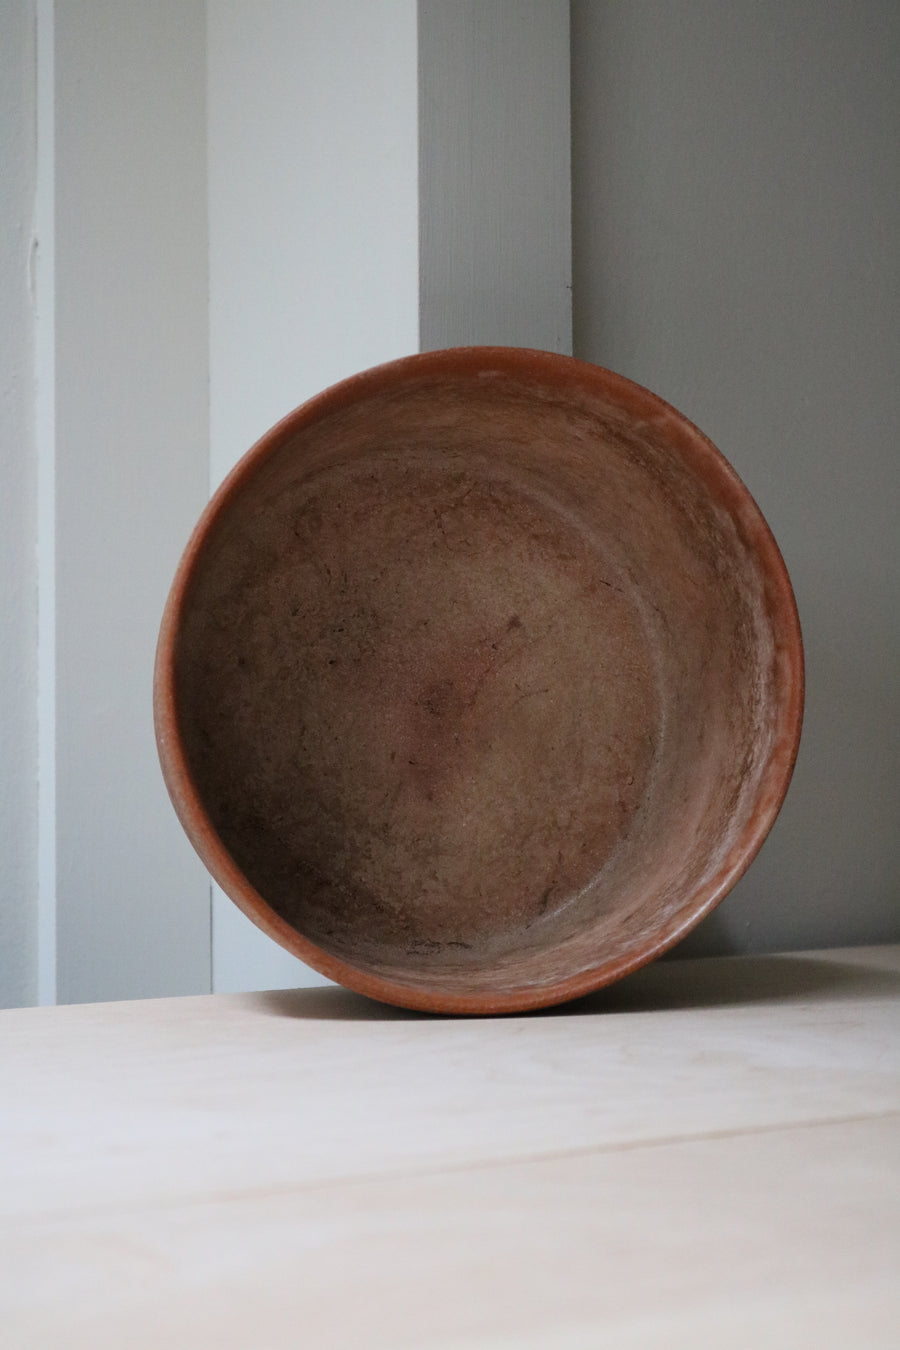 Clay planter - Form + Beyond graphic mirrors & wall art gallery london